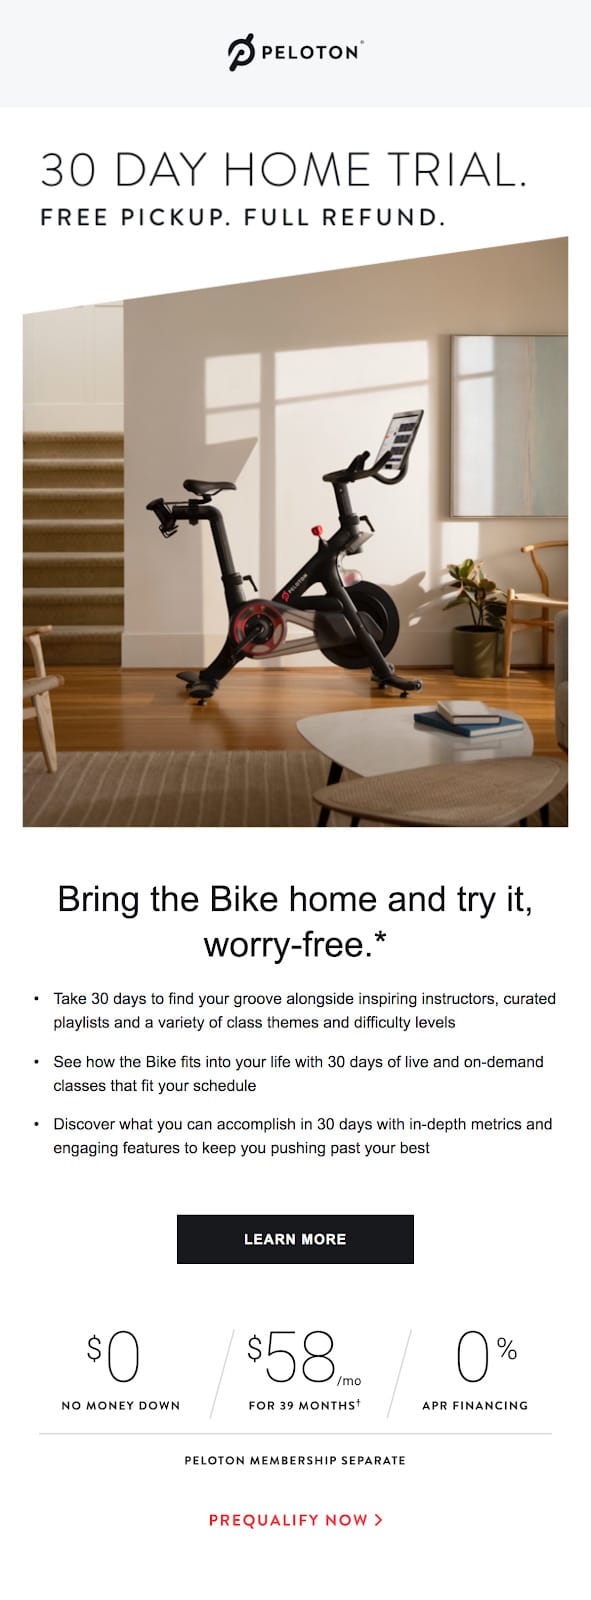 Peloton 30 day trial email